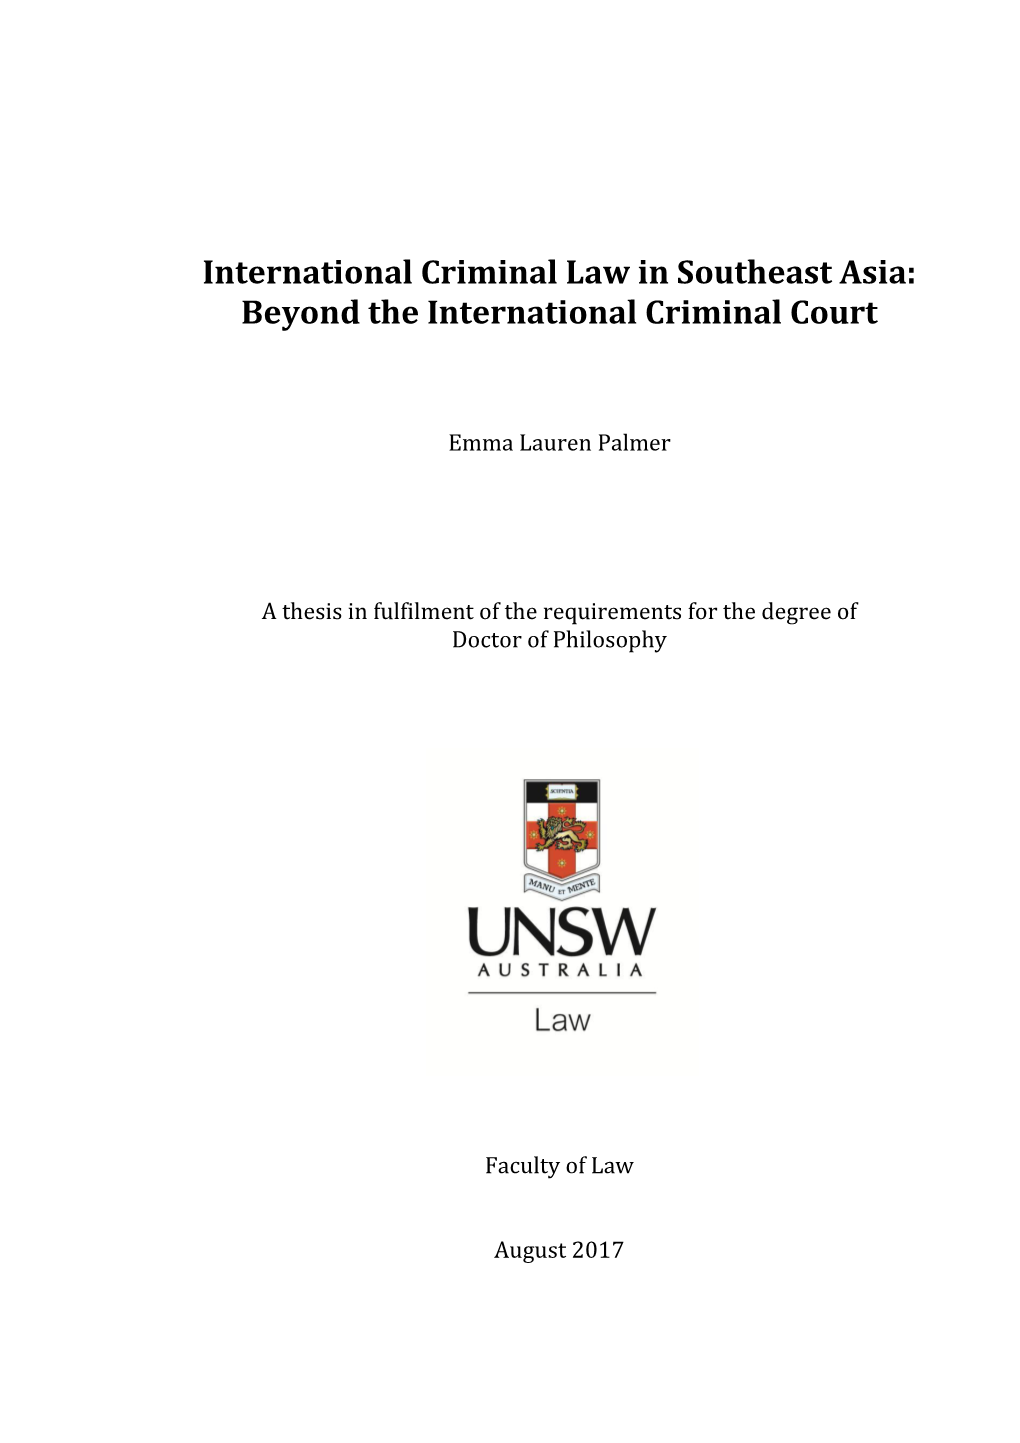 International Criminal Law in Southeast Asia: Beyond the International Criminal Court